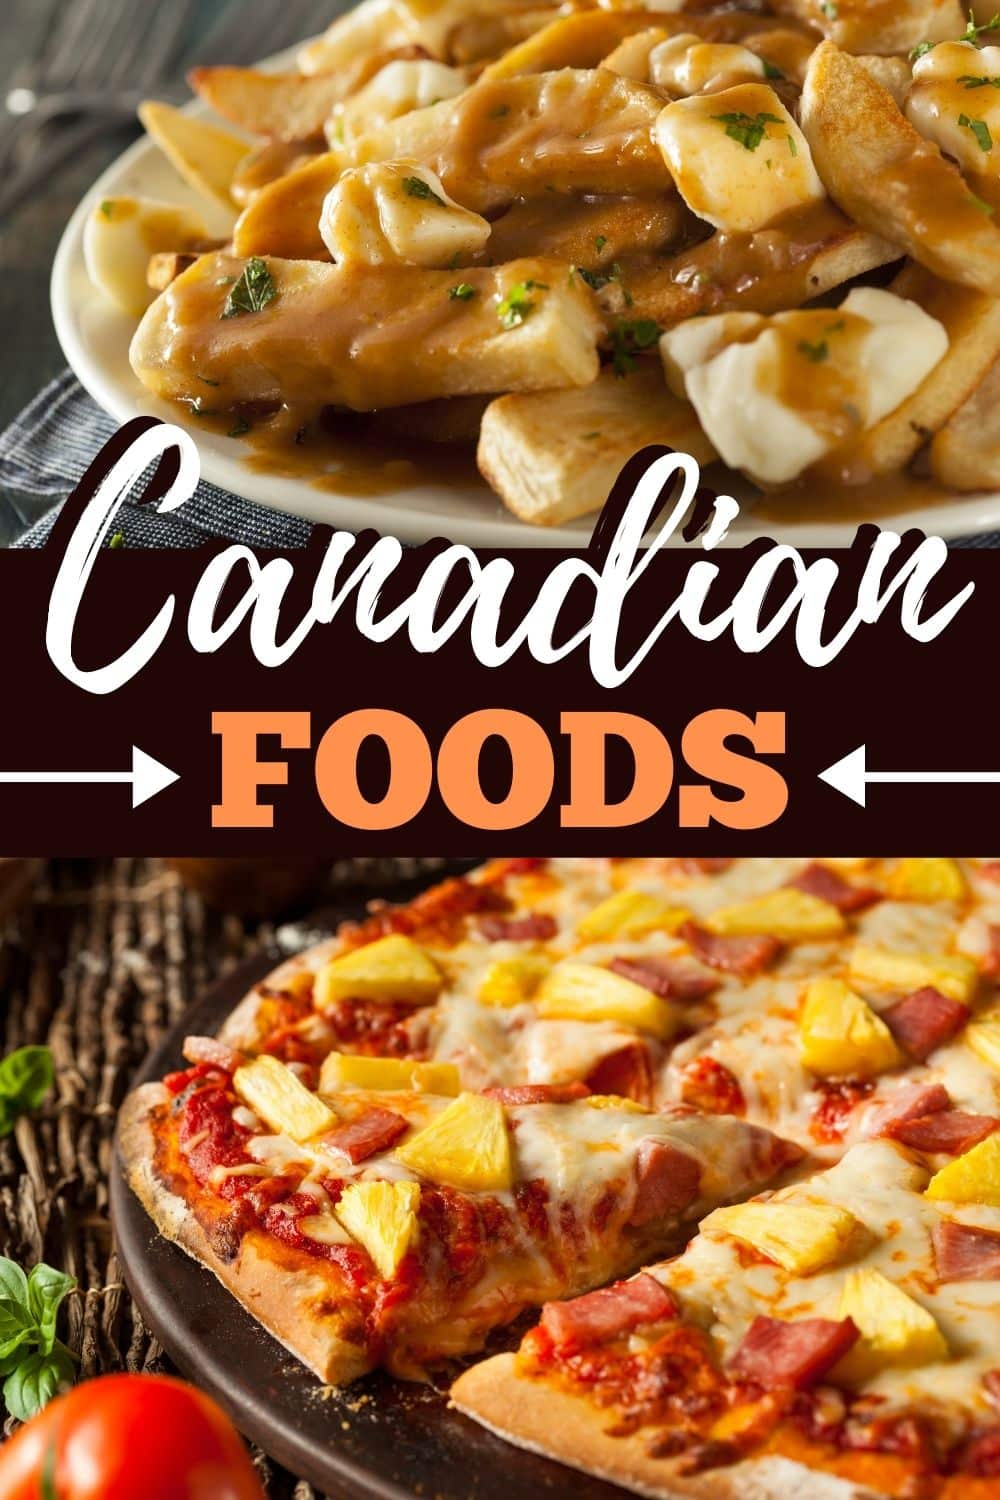 food tourism in canada